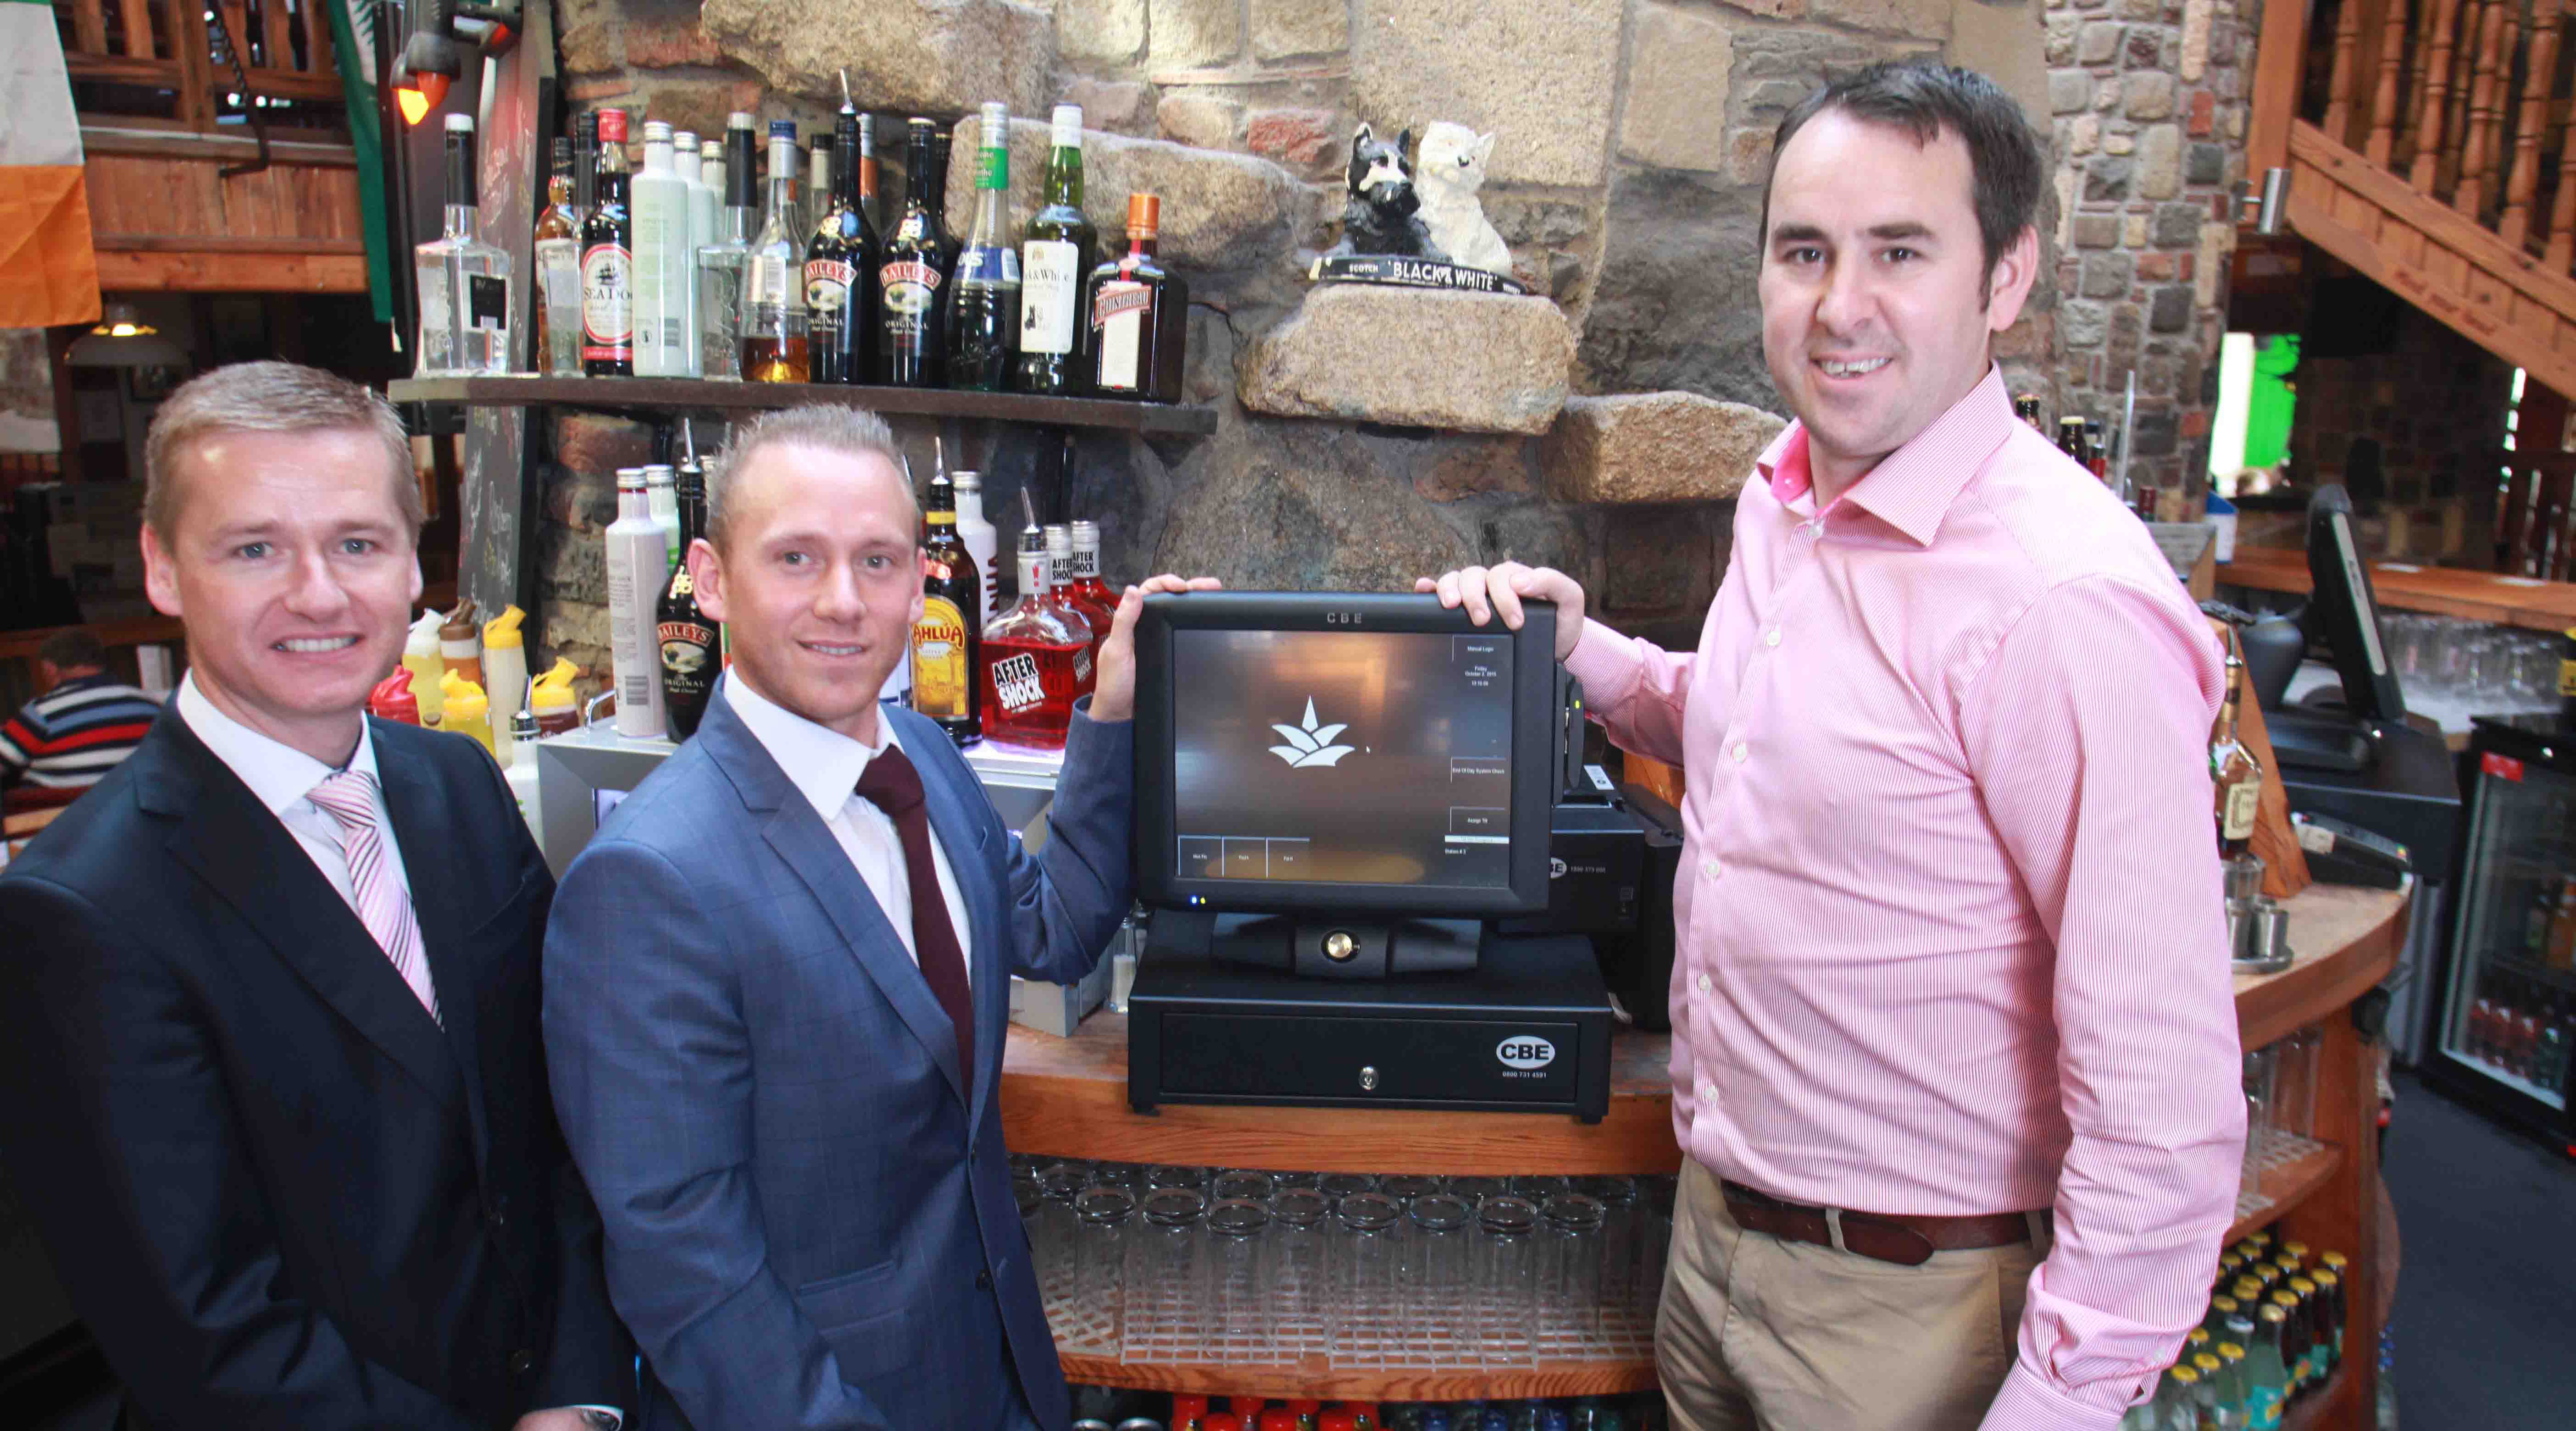 From left: International Sales and Marketing Manager Seamus McHugh with CBE Area Sales Manager Michael Gaughan and Eddie Fitzgerald of the Fitzgerald Group at The Old Mill Pub in Tallaght.